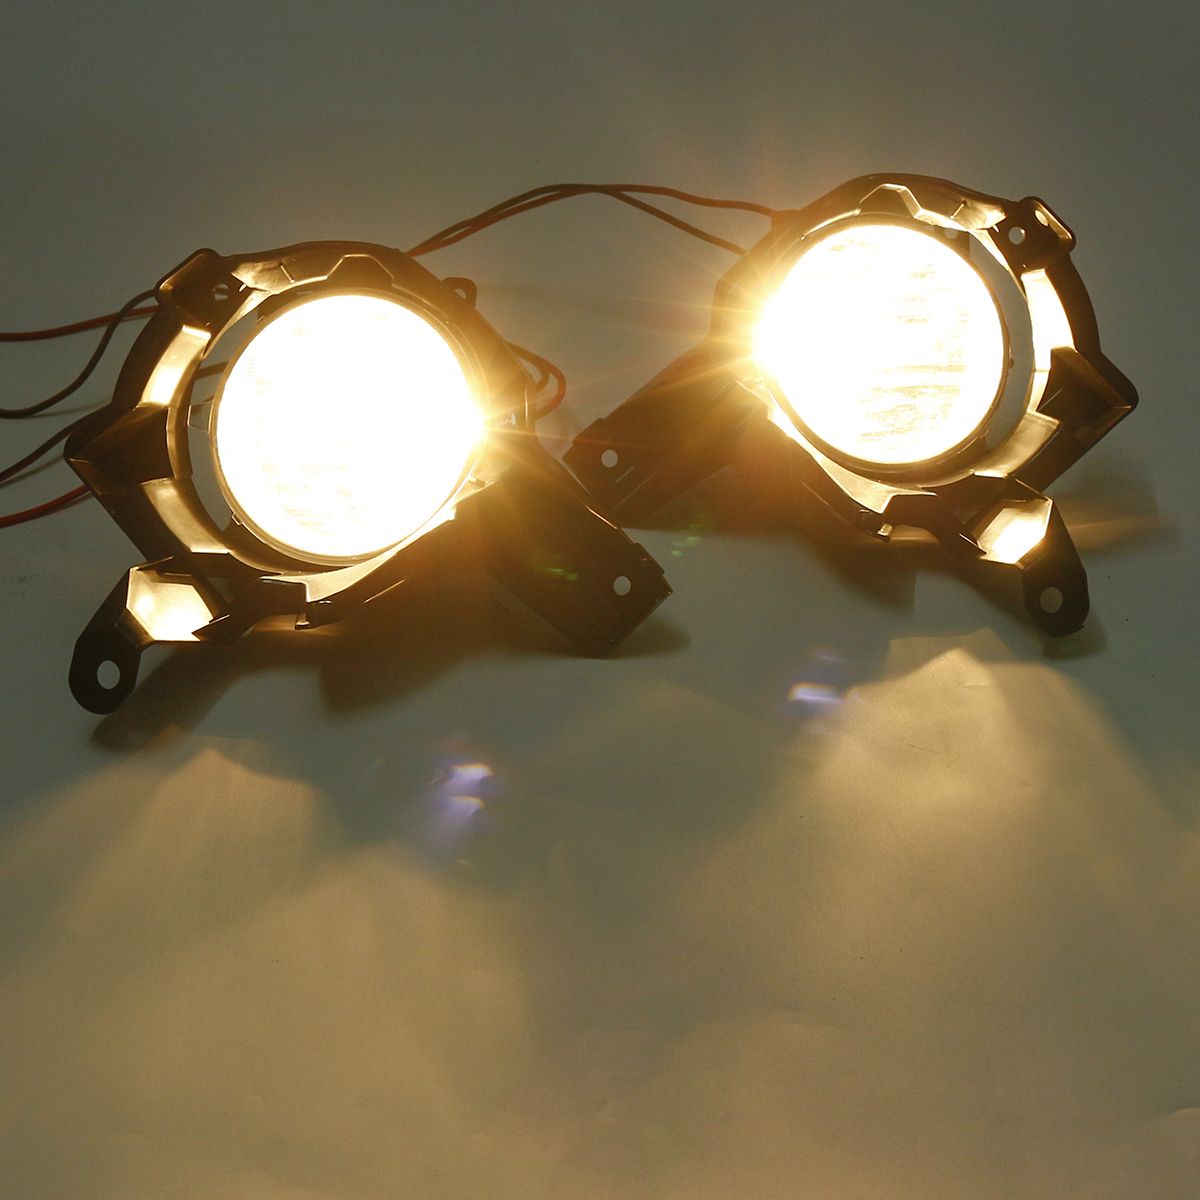 2Pcs-Car-Front-Bumper-Fog-Lights-Lamps-With-Brackets-Wiring-Harness-Kits-For-Toyota-RAV4-2013-2015-1680517